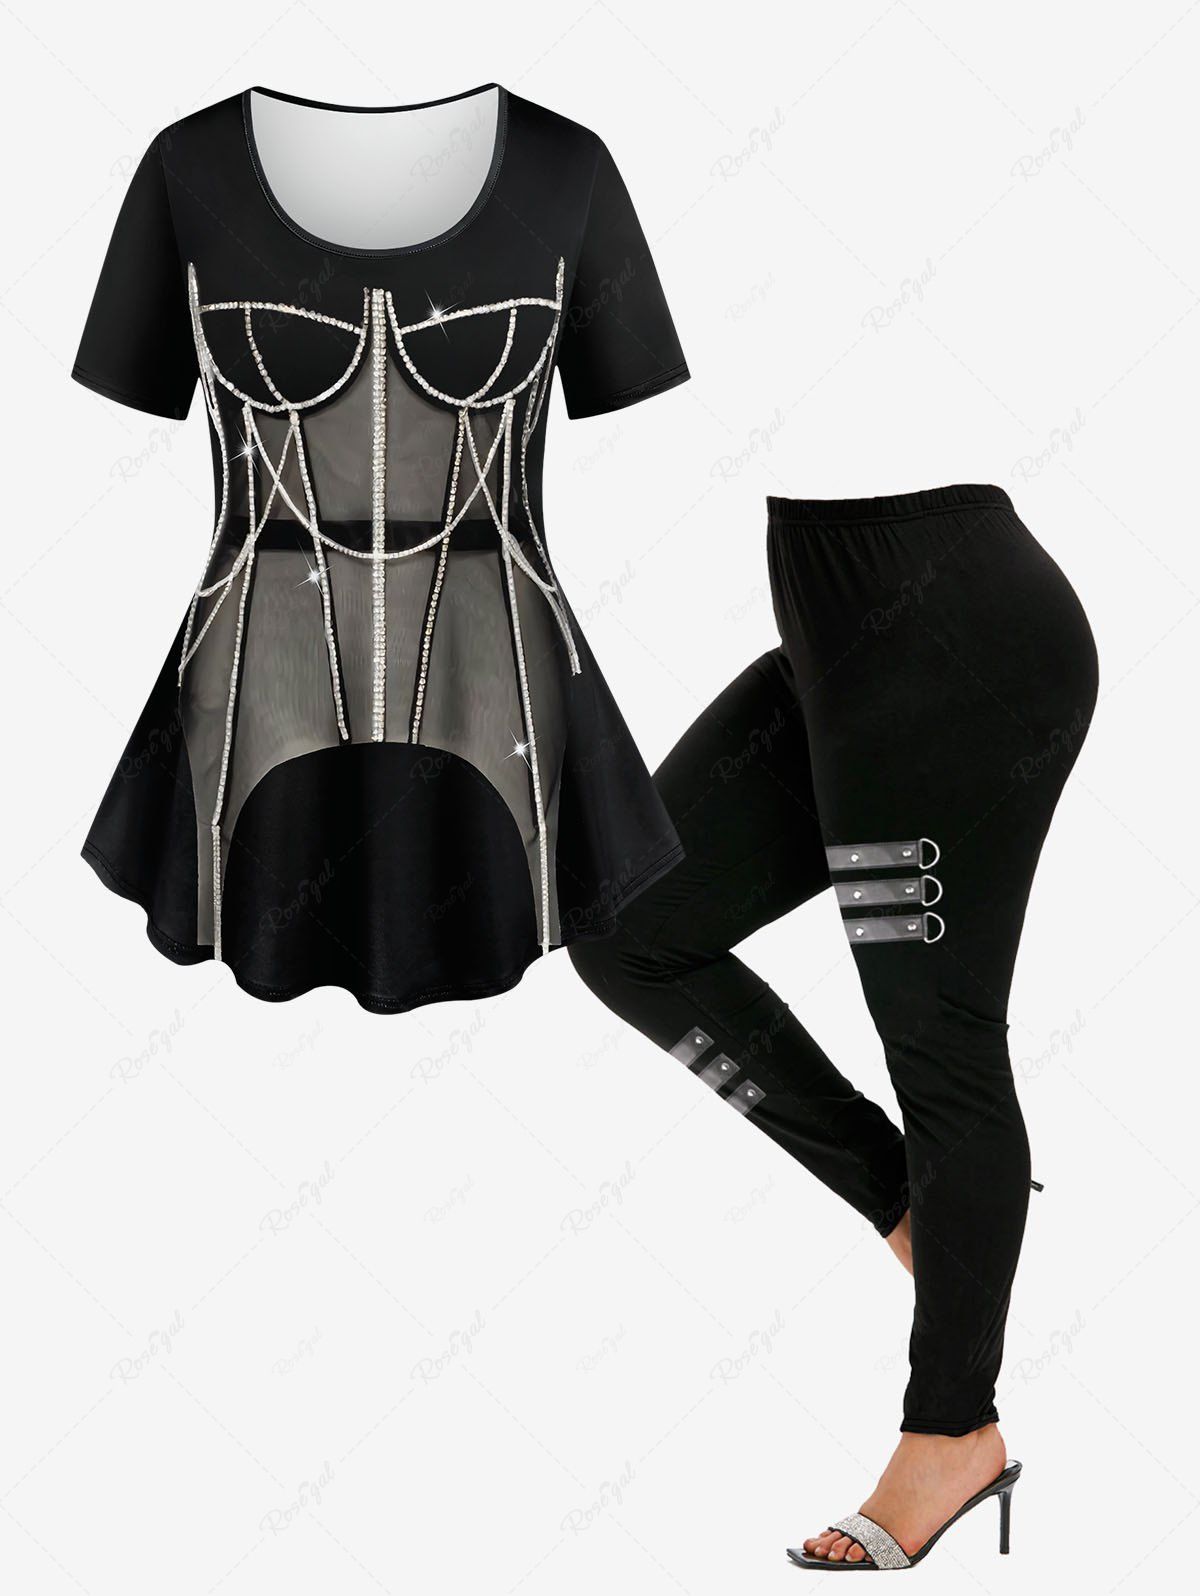 Store Chains Glitter Fitted Dress 3D Printed T-shirt and Rivet Leather Stripe 3D Printed Leggings Plus Size Outfit  